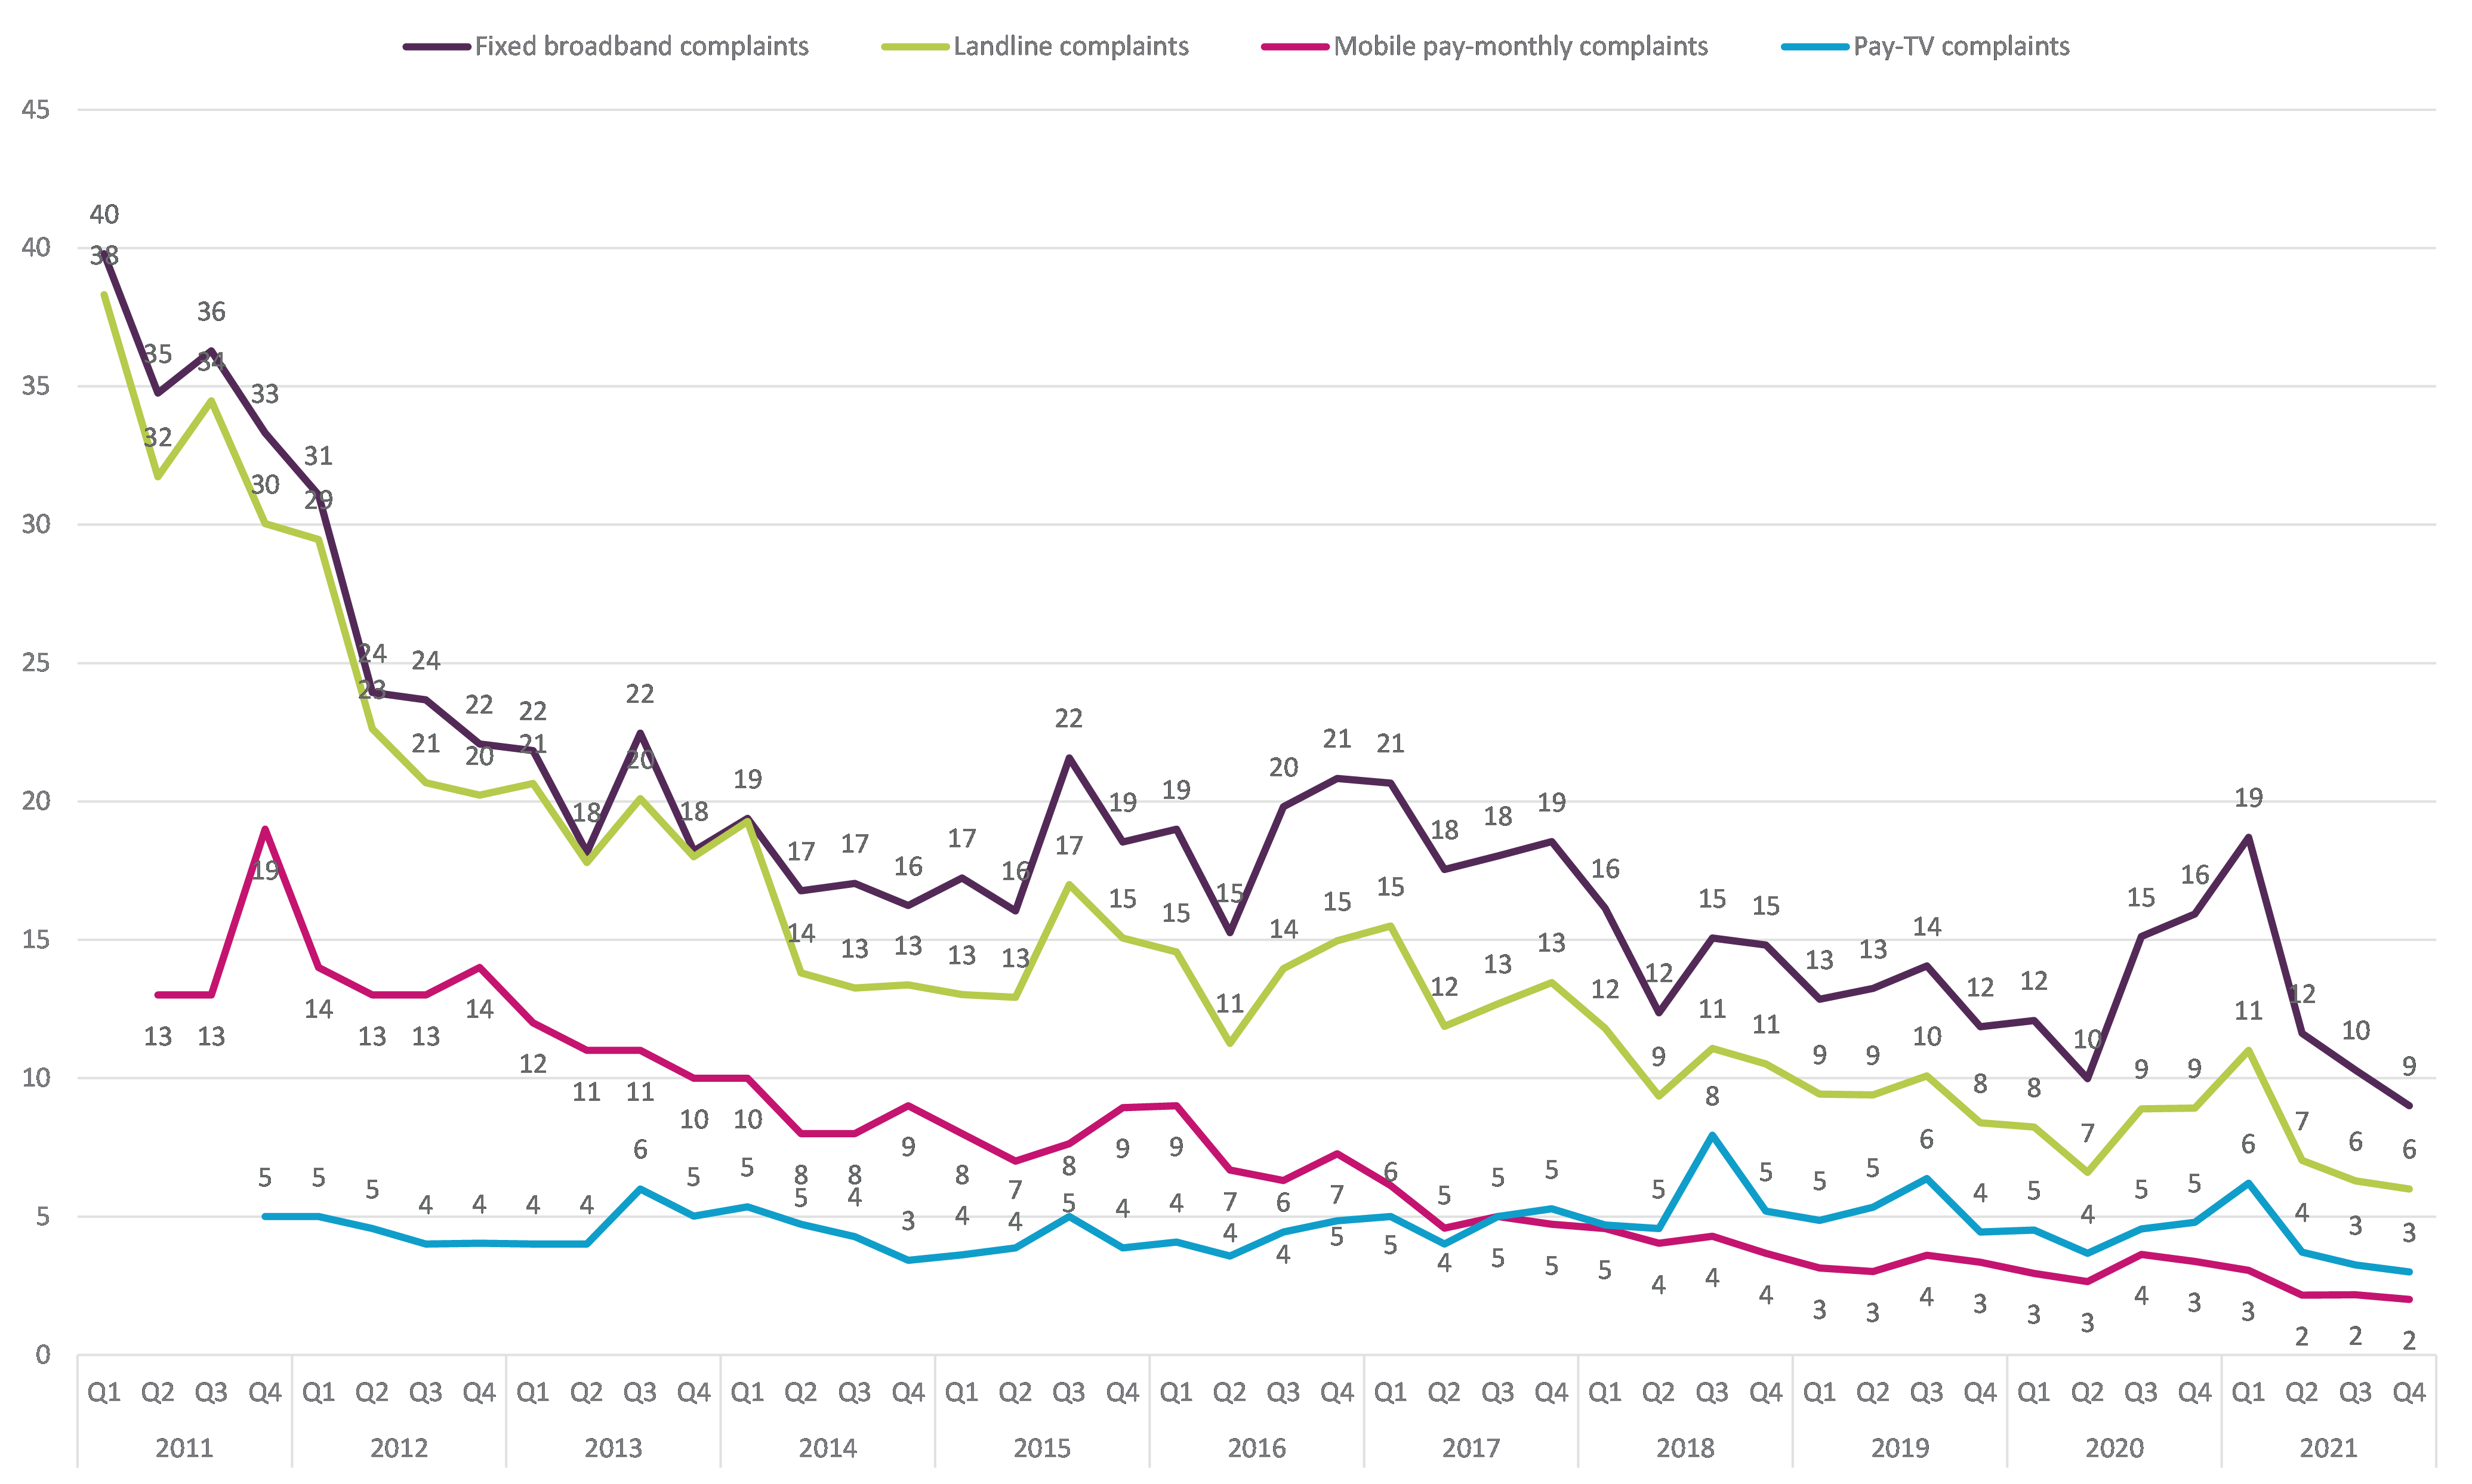 Graph showing trend data on residential consumer complaints received by Ofcom across landline, fixed broadband, pay-monthly mobile and pay TV services, by communications provider. It shows the relative volume of complaints per sector per 100,000 subscribers for the Q1 2011 – Q4 2021 period. The relative volume of complaints per 100,000 subscribers decreased for fixed broadband from 10 to 9. Landline, pay-TV and mobile pay monthly remained the same at 6, 3 and 2 respectively. 